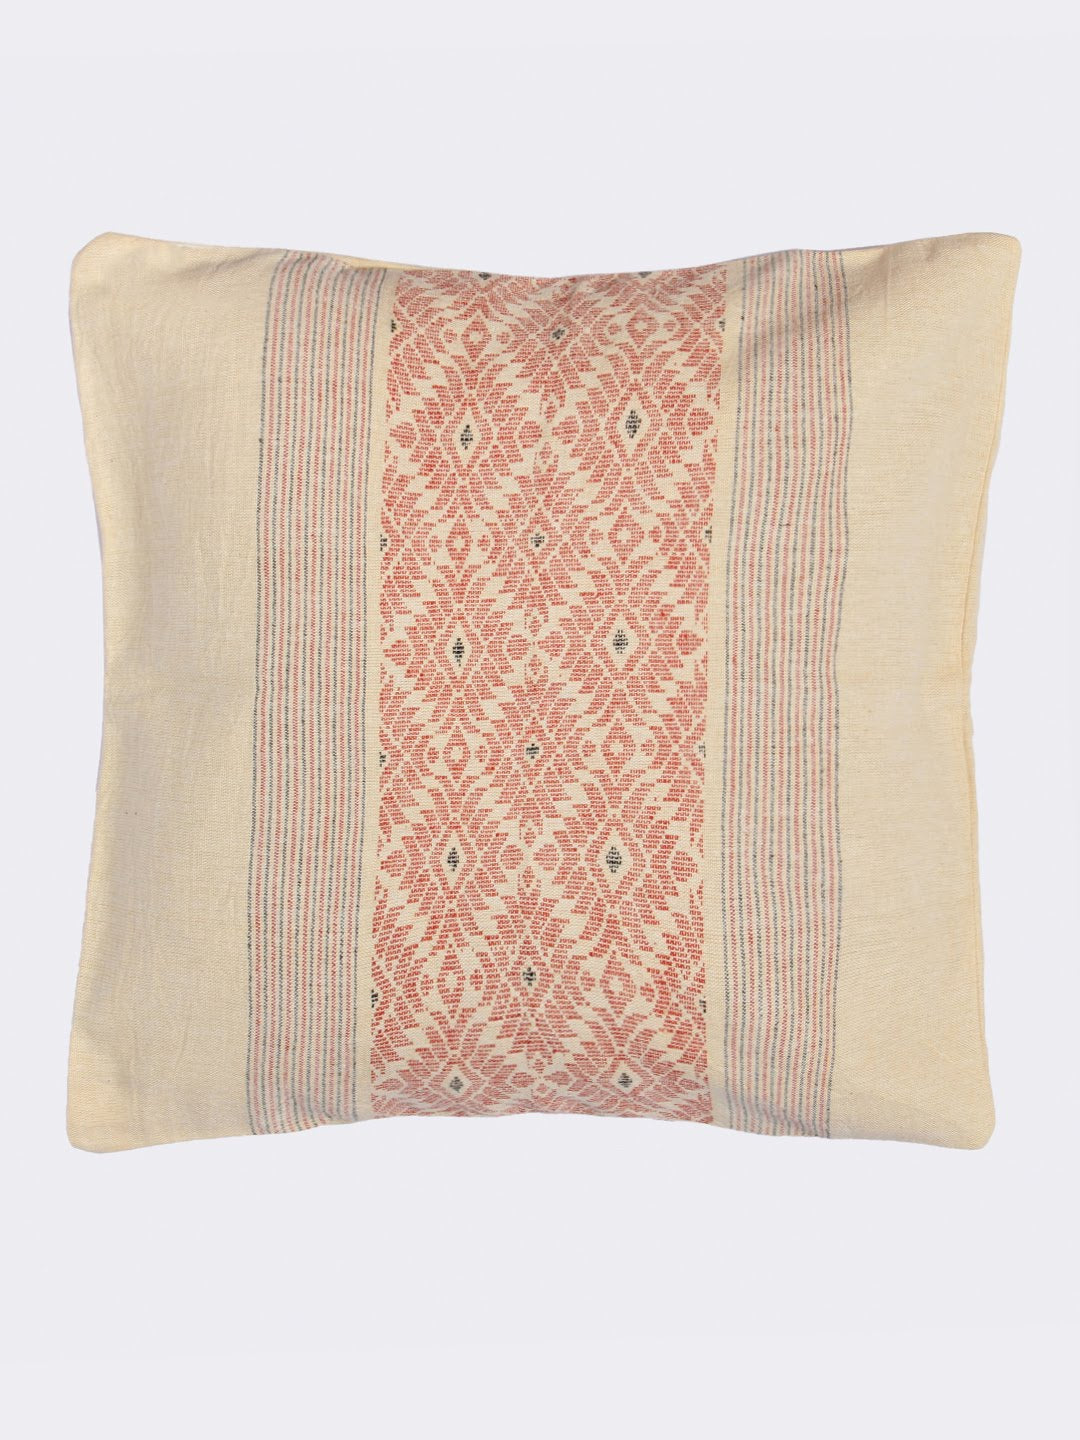 Handcrafted Beige Red Cushion Cover with an Assamese design- Pack of 1